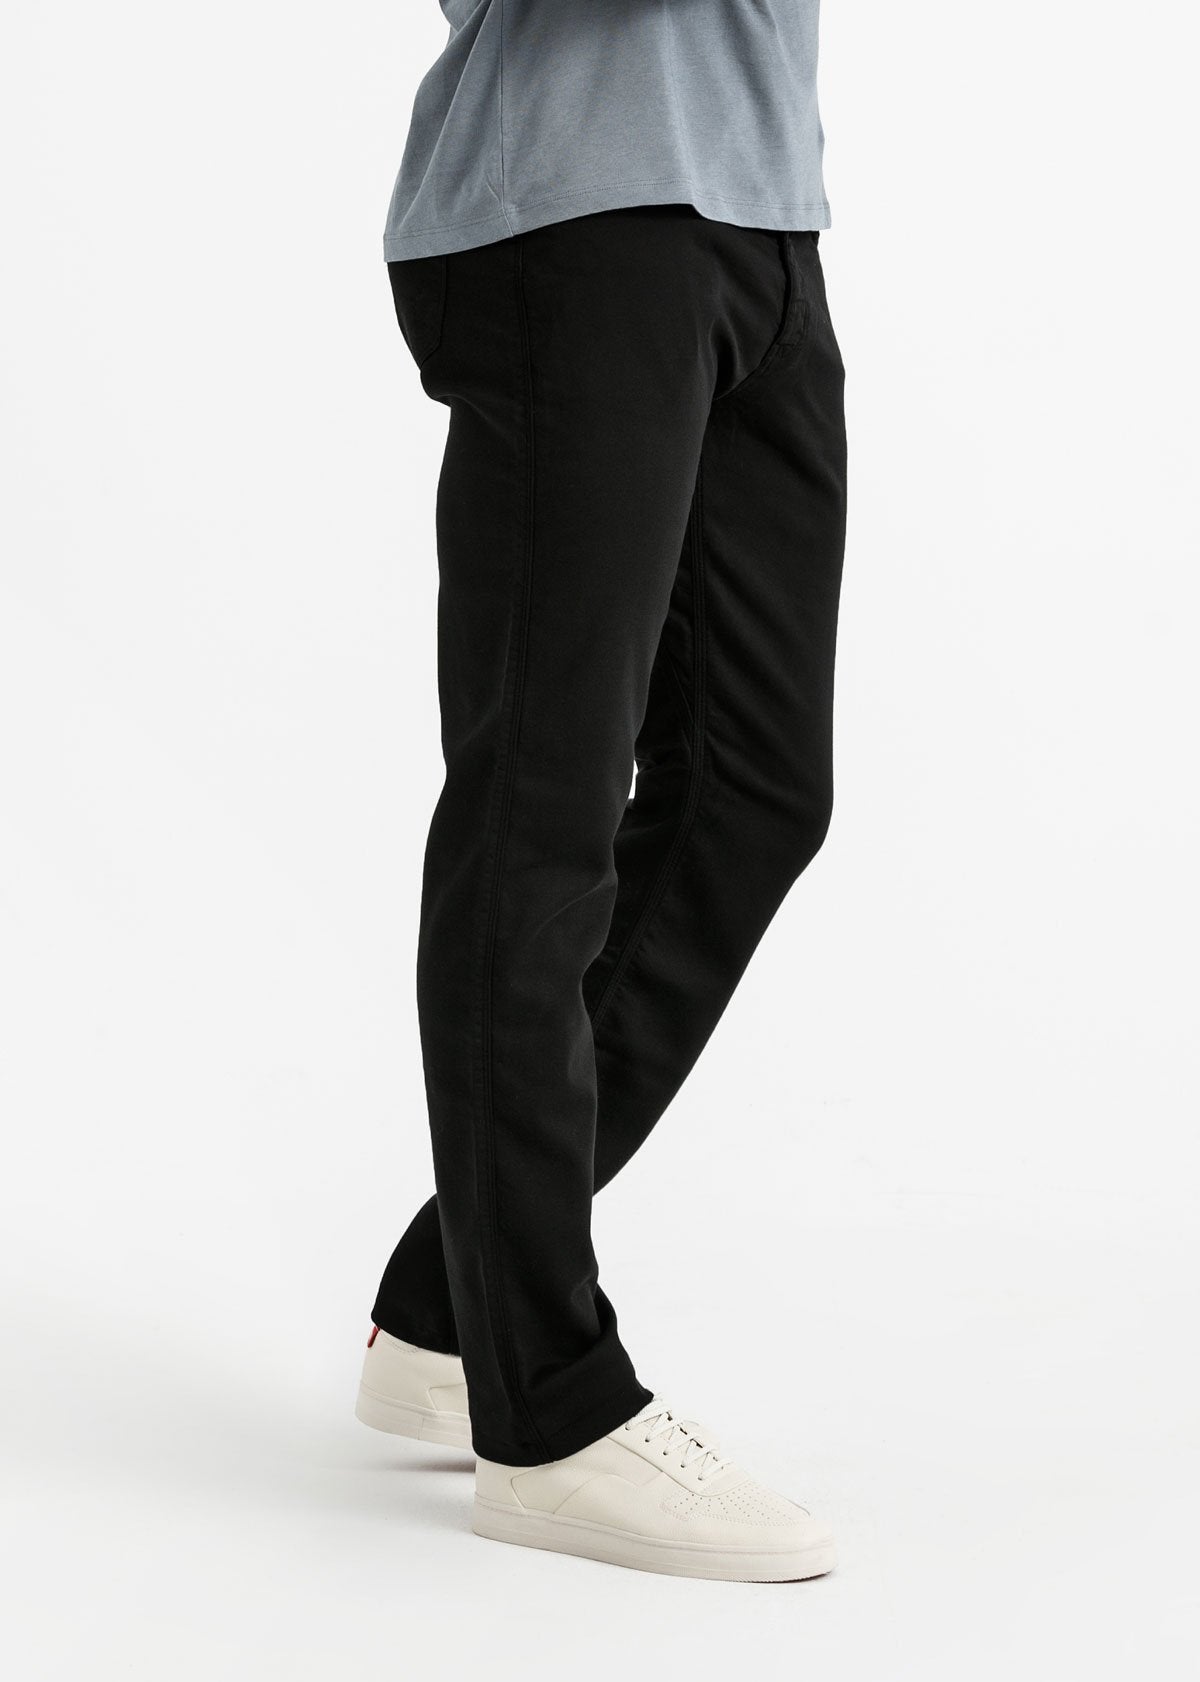 man wearing a black Relaxed Fit Sweatpant side